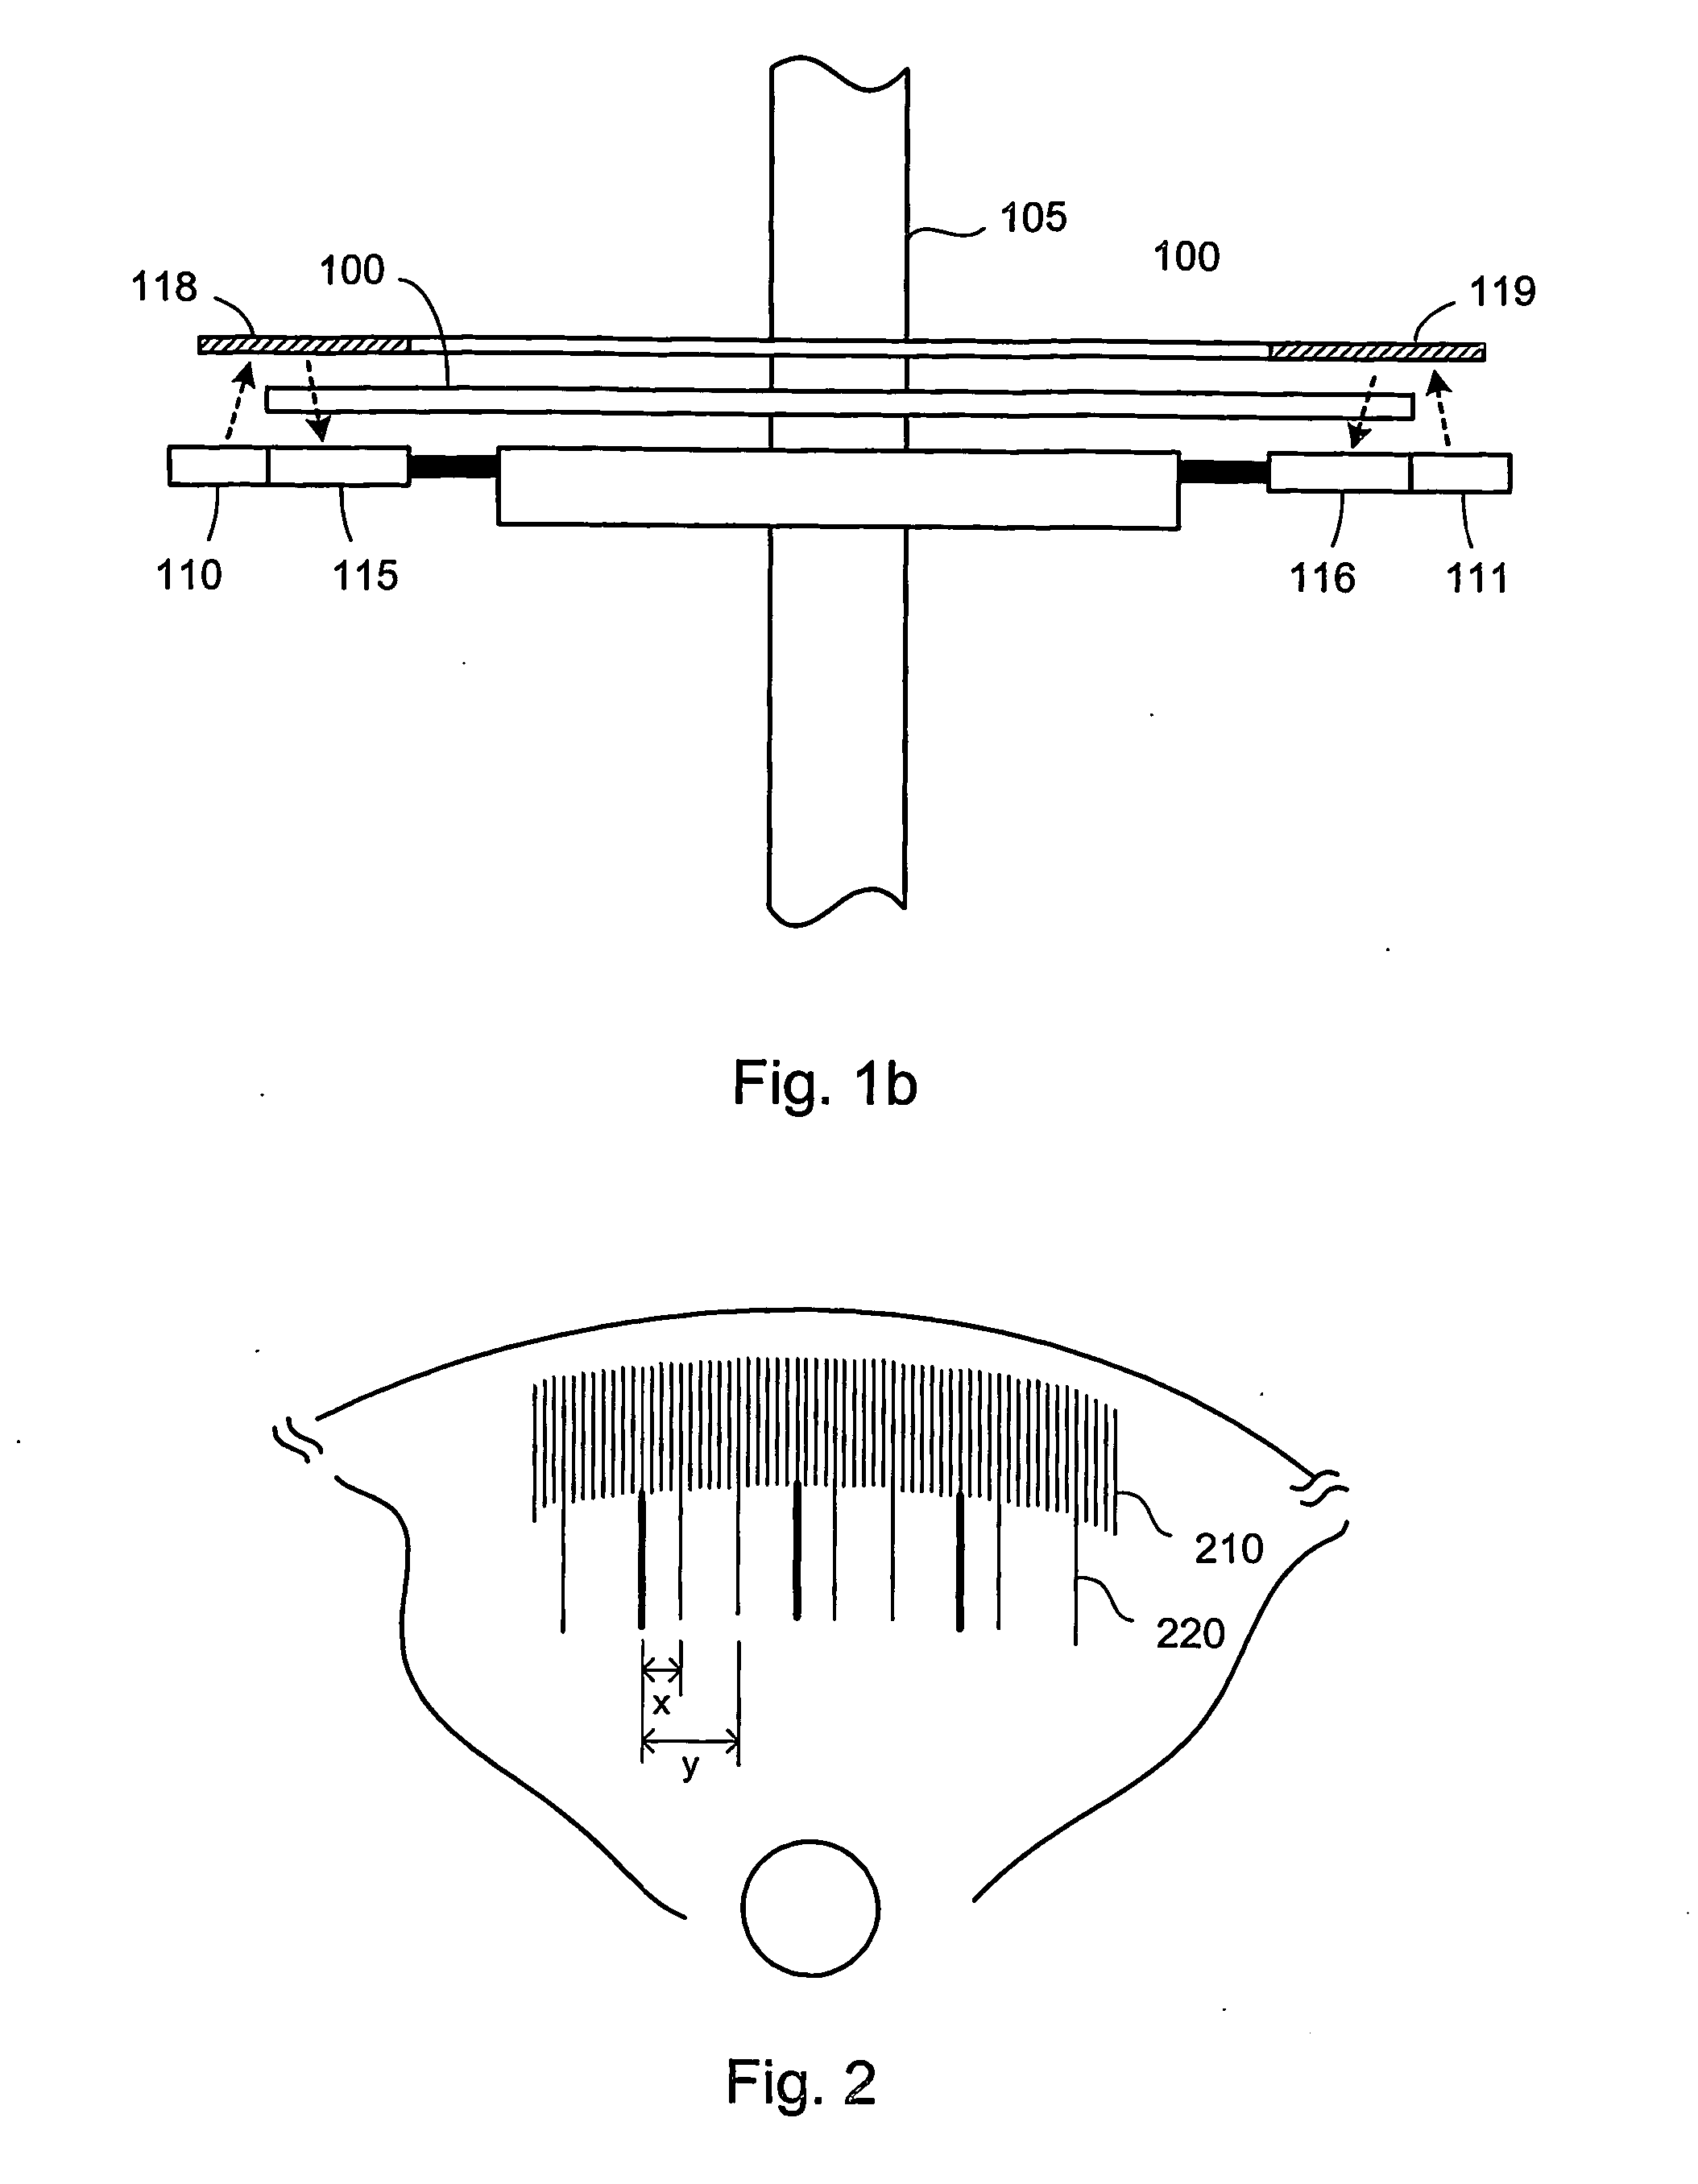 Method and apparatus for absolute optical encoders with reduced sensitivity to scale or disk mounting errors